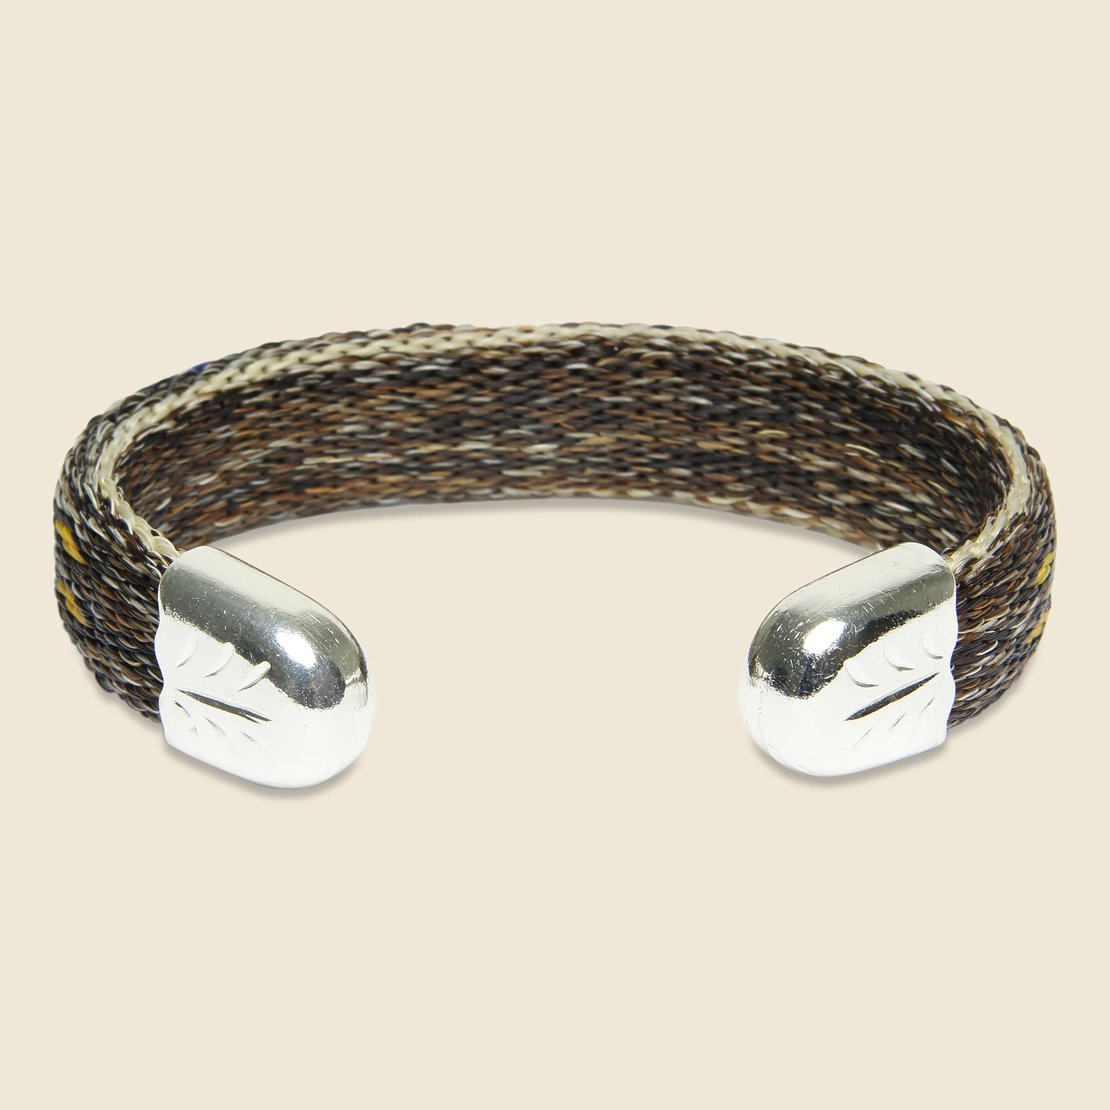 Bendable Horsehair Bracelet - Brown/Multi - Chamula - STAG Provisions - Accessories - Cuffs